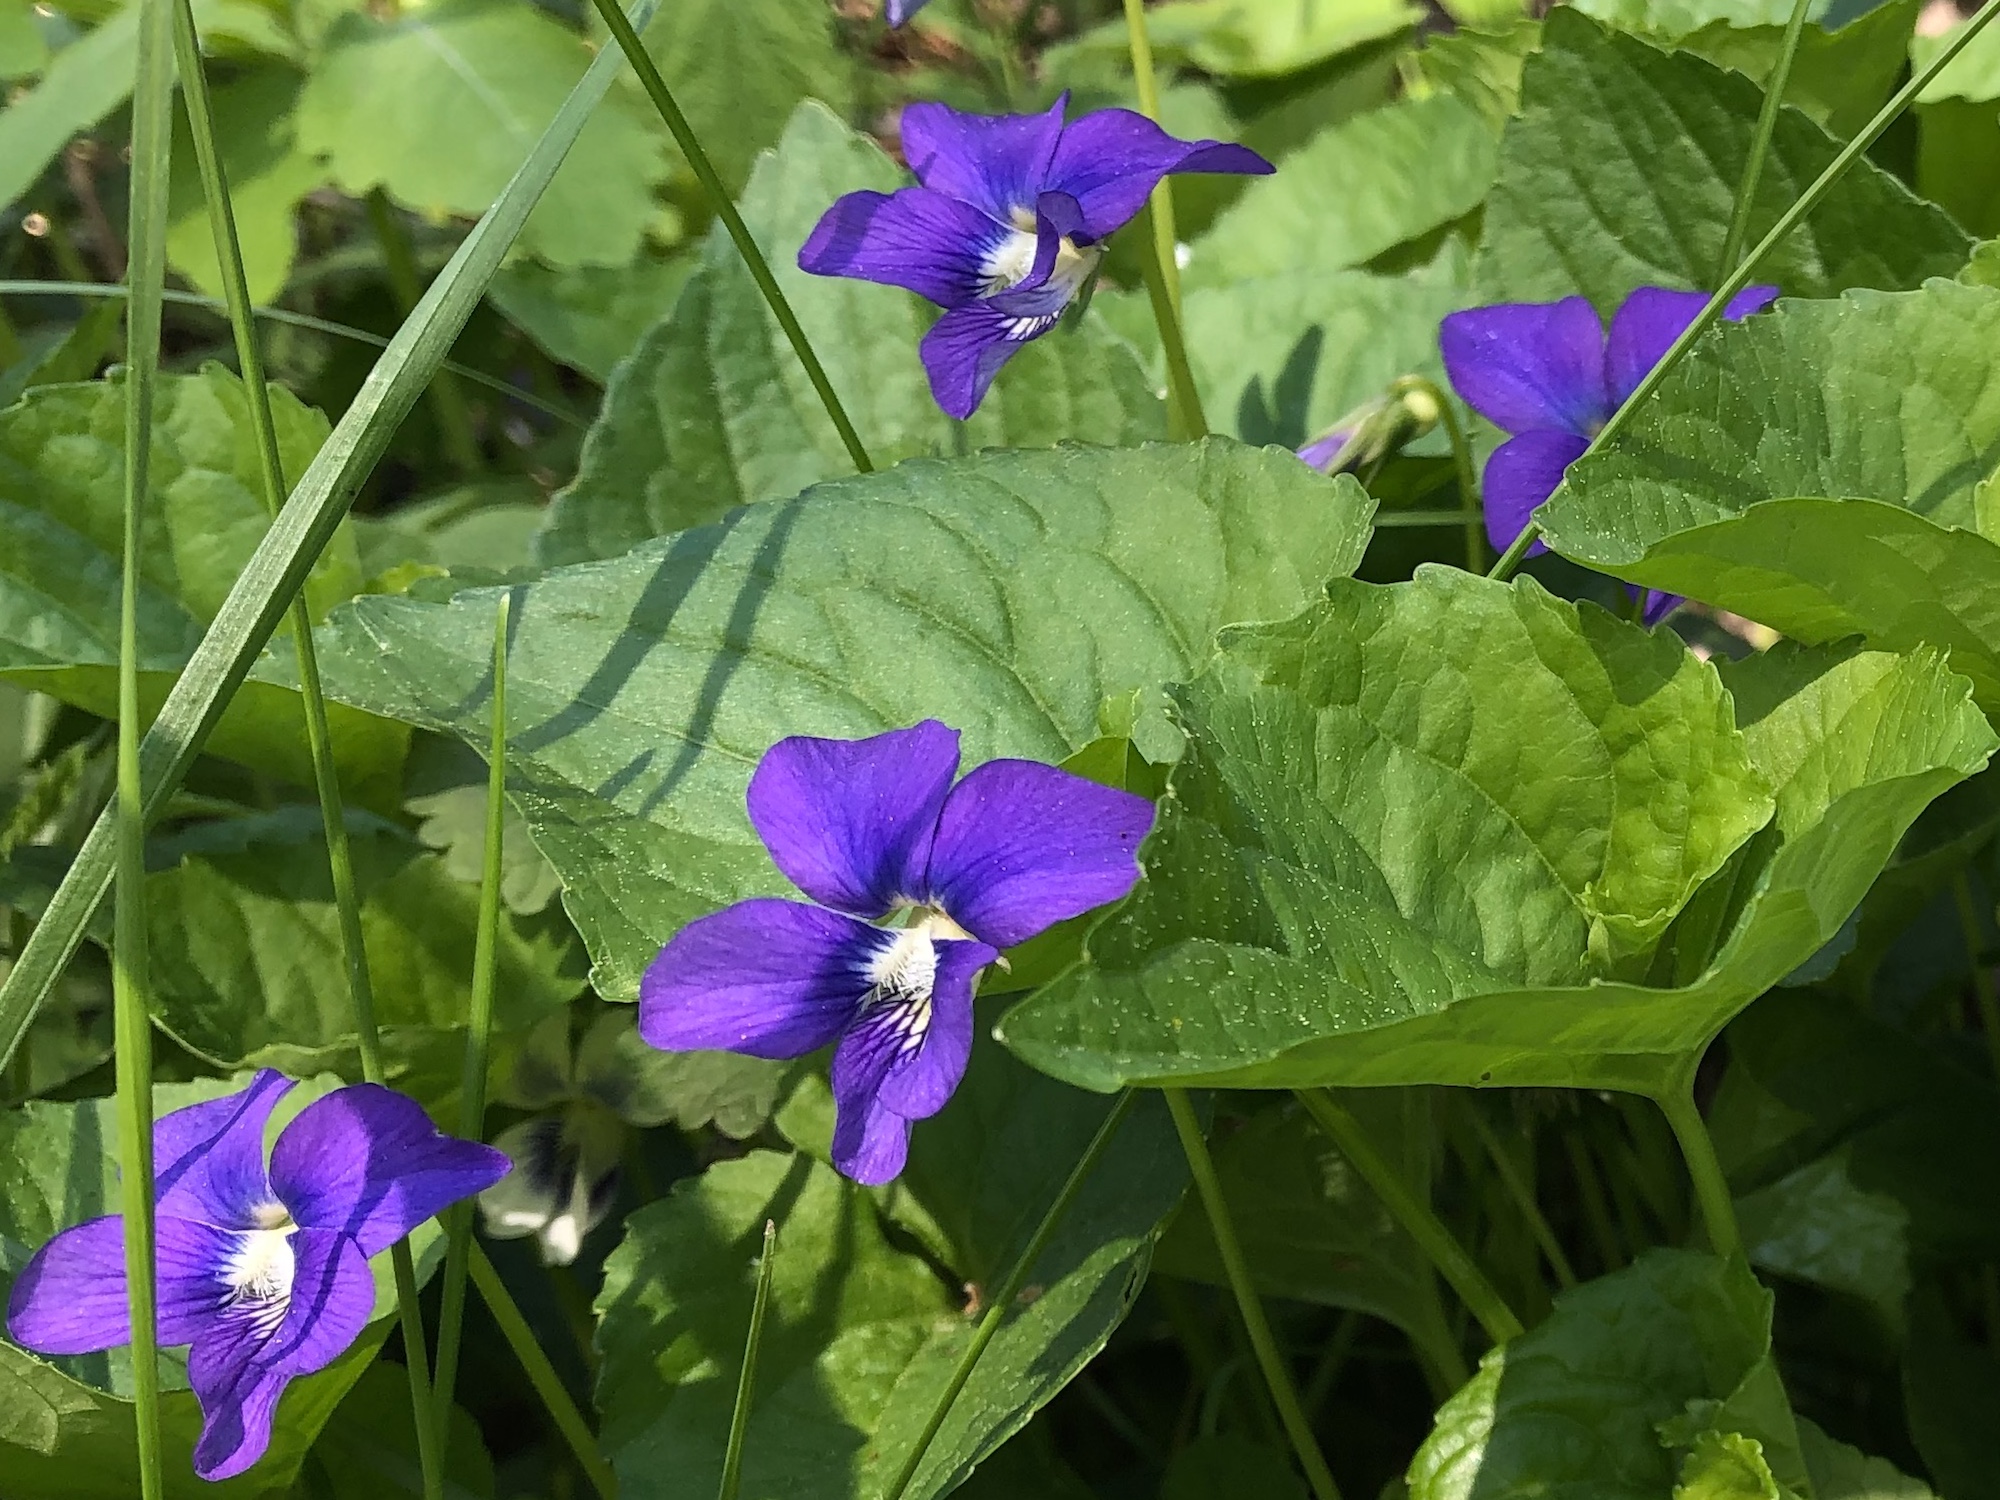 Wood Violets near the Duck Pond on May 14, 2019.